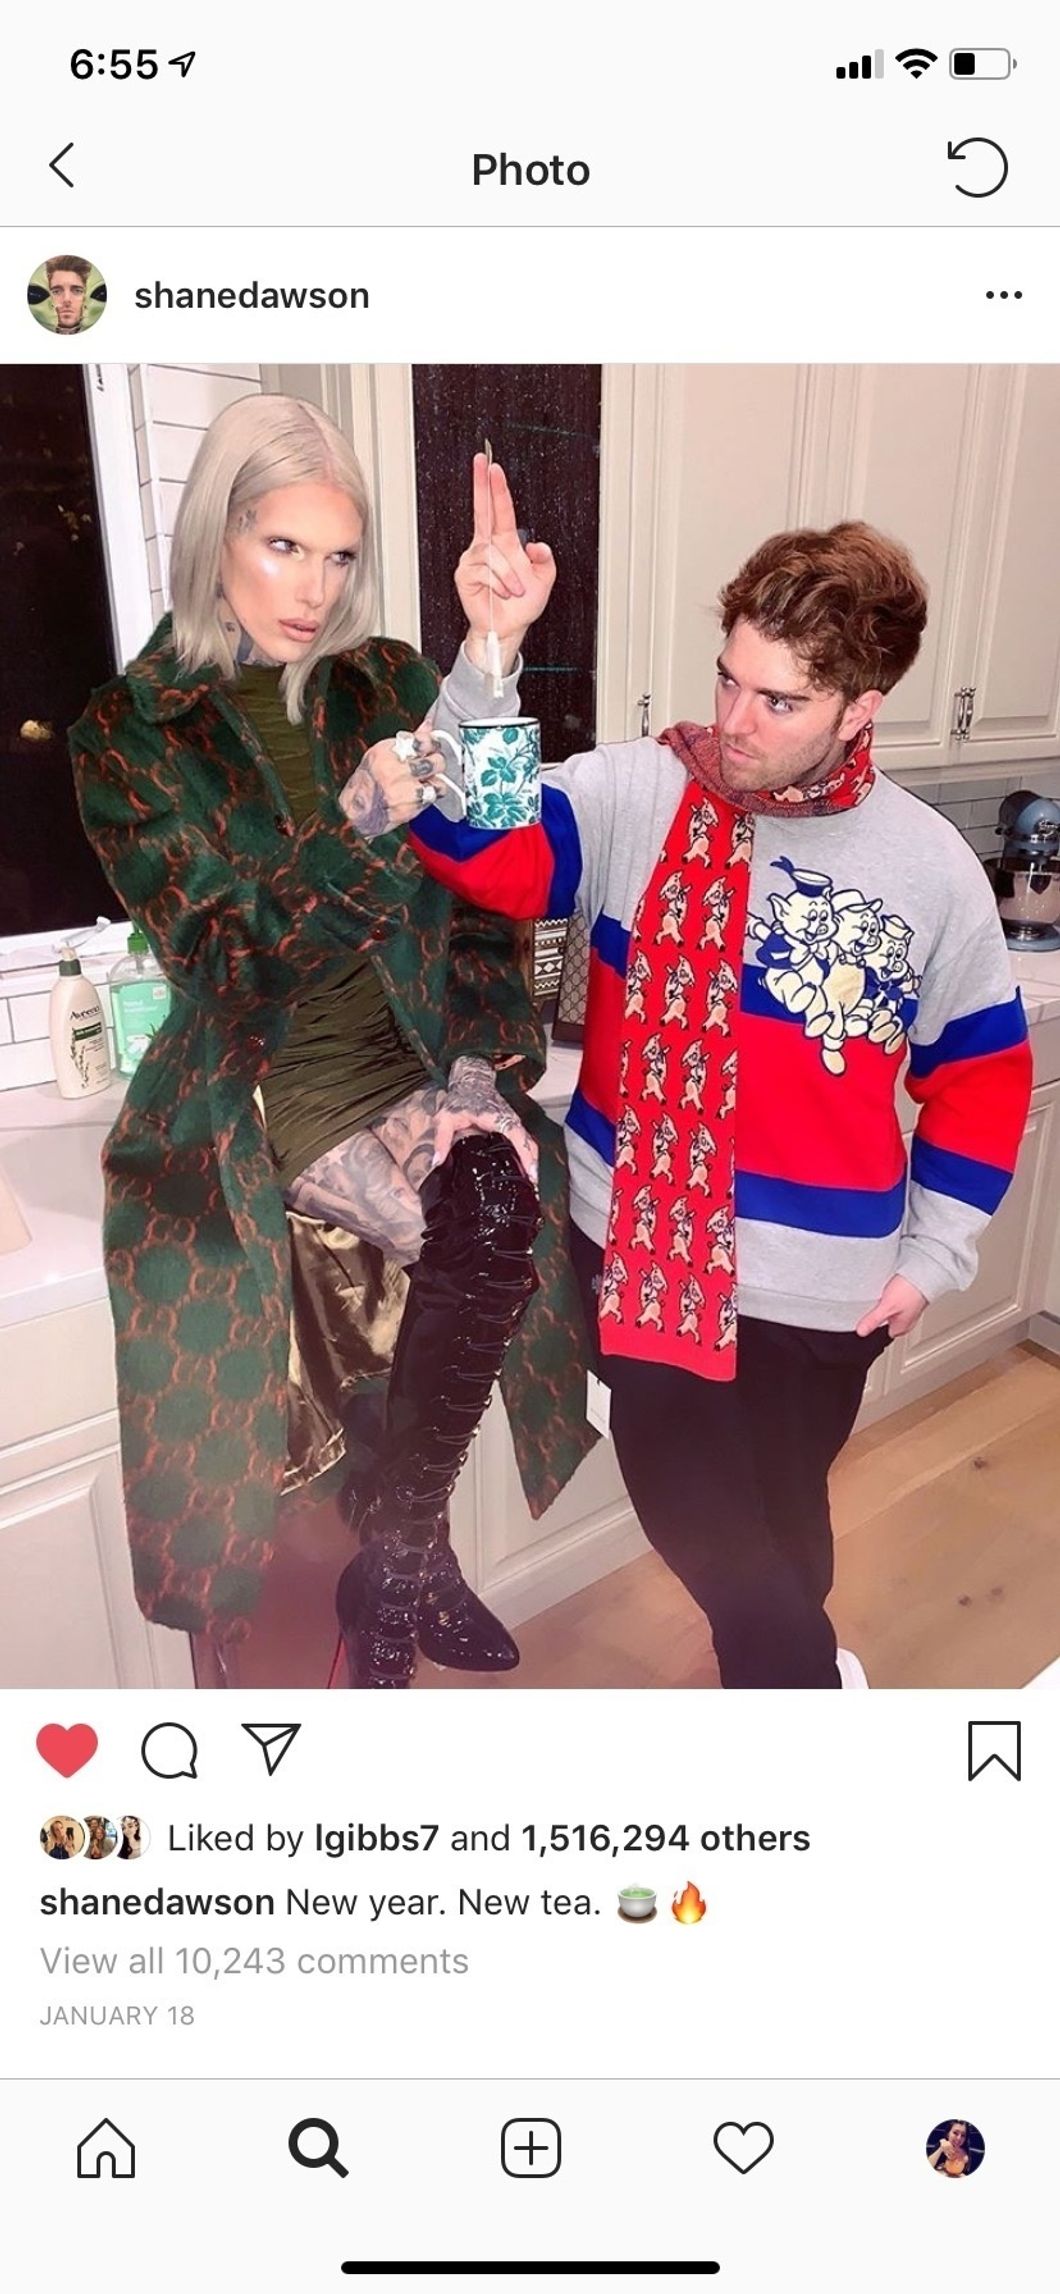 Shane Dawson and Jeffree Star Are Collaborating Again, And I'm Not Sure The Internet Is Ready